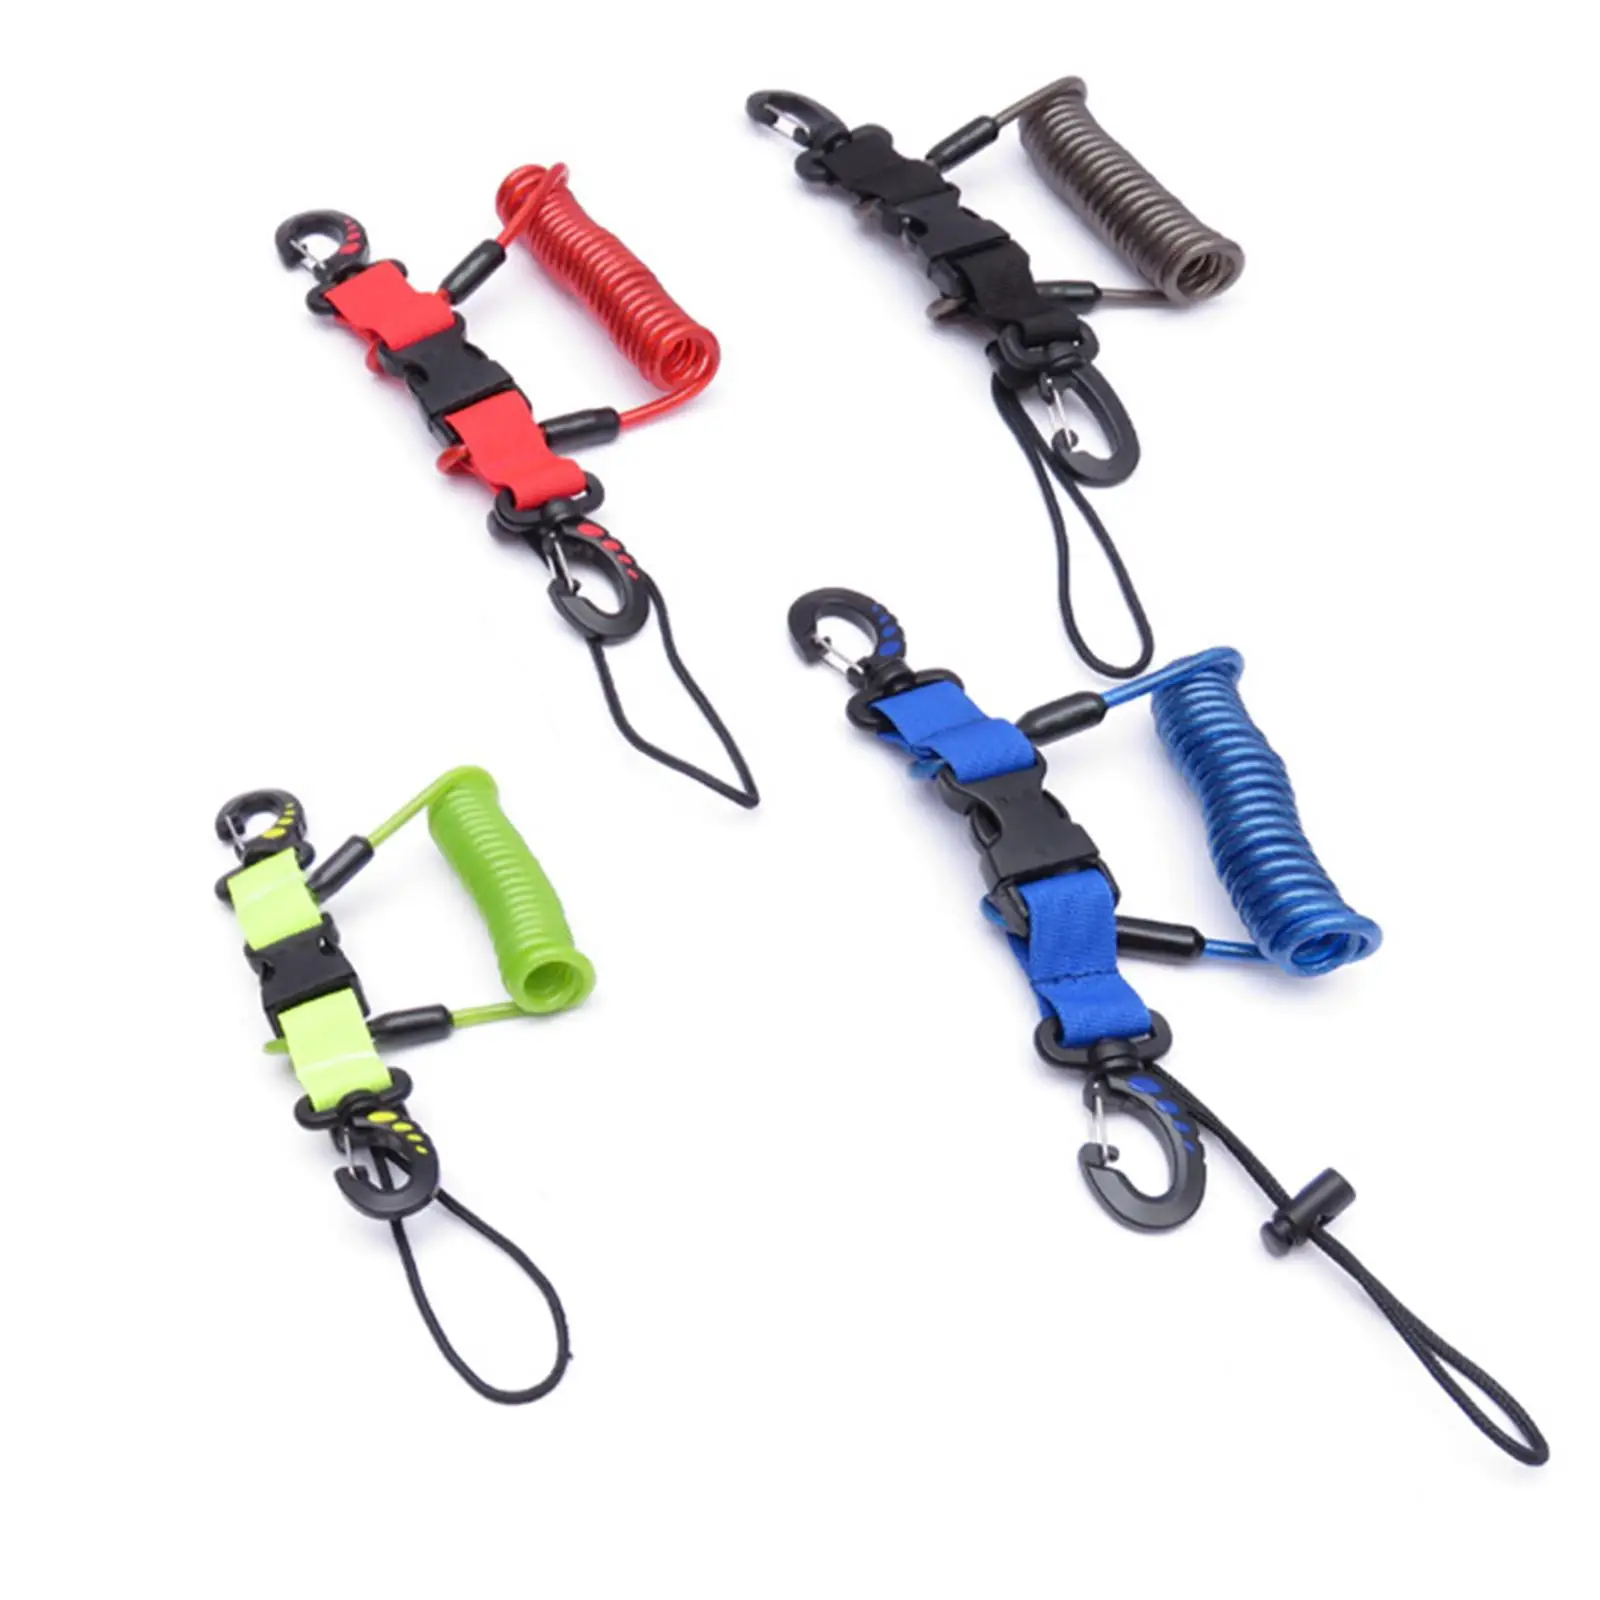 Scuba Dive Coil Camera Lanyard Webbing Strap for Diving Tools Underwater